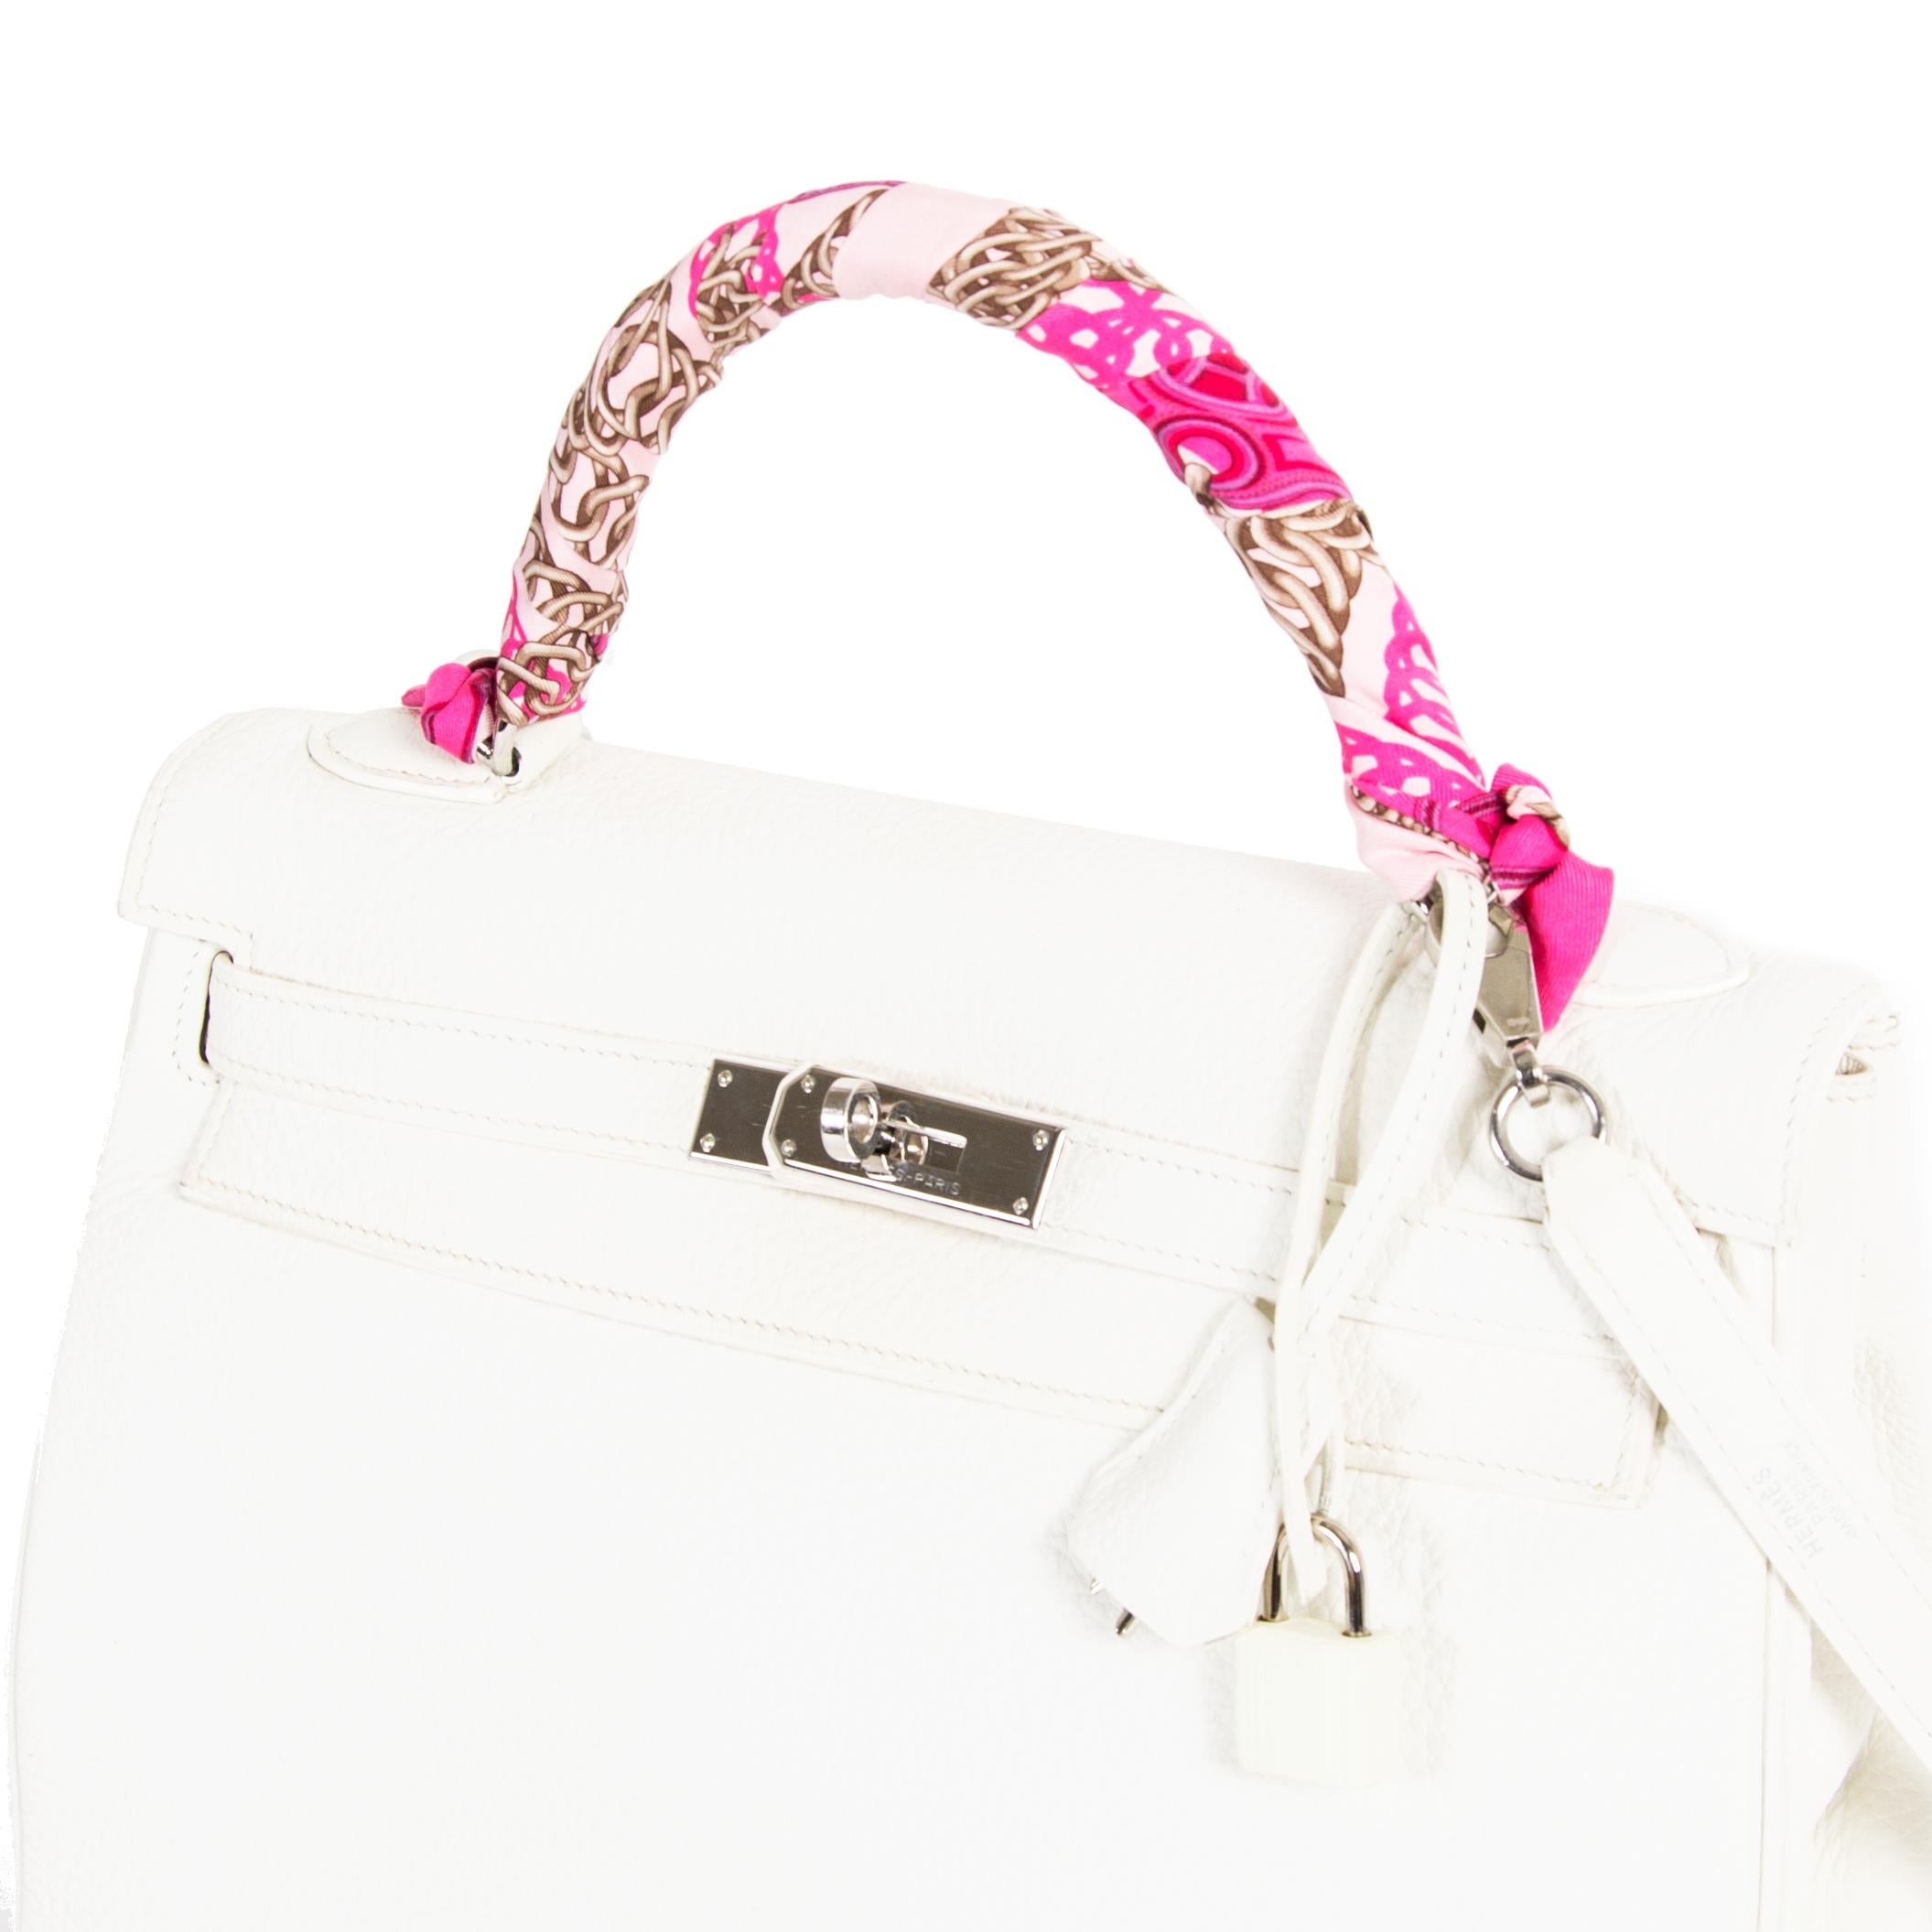 Hermès Kelly 32 White Togo PHW in very good condition. This ultimate classic bag is crafted from Clemence Taurillon leather, which is known to be very durable. The pebbled leather comes in a stunning white hue, which complements the gorgeous